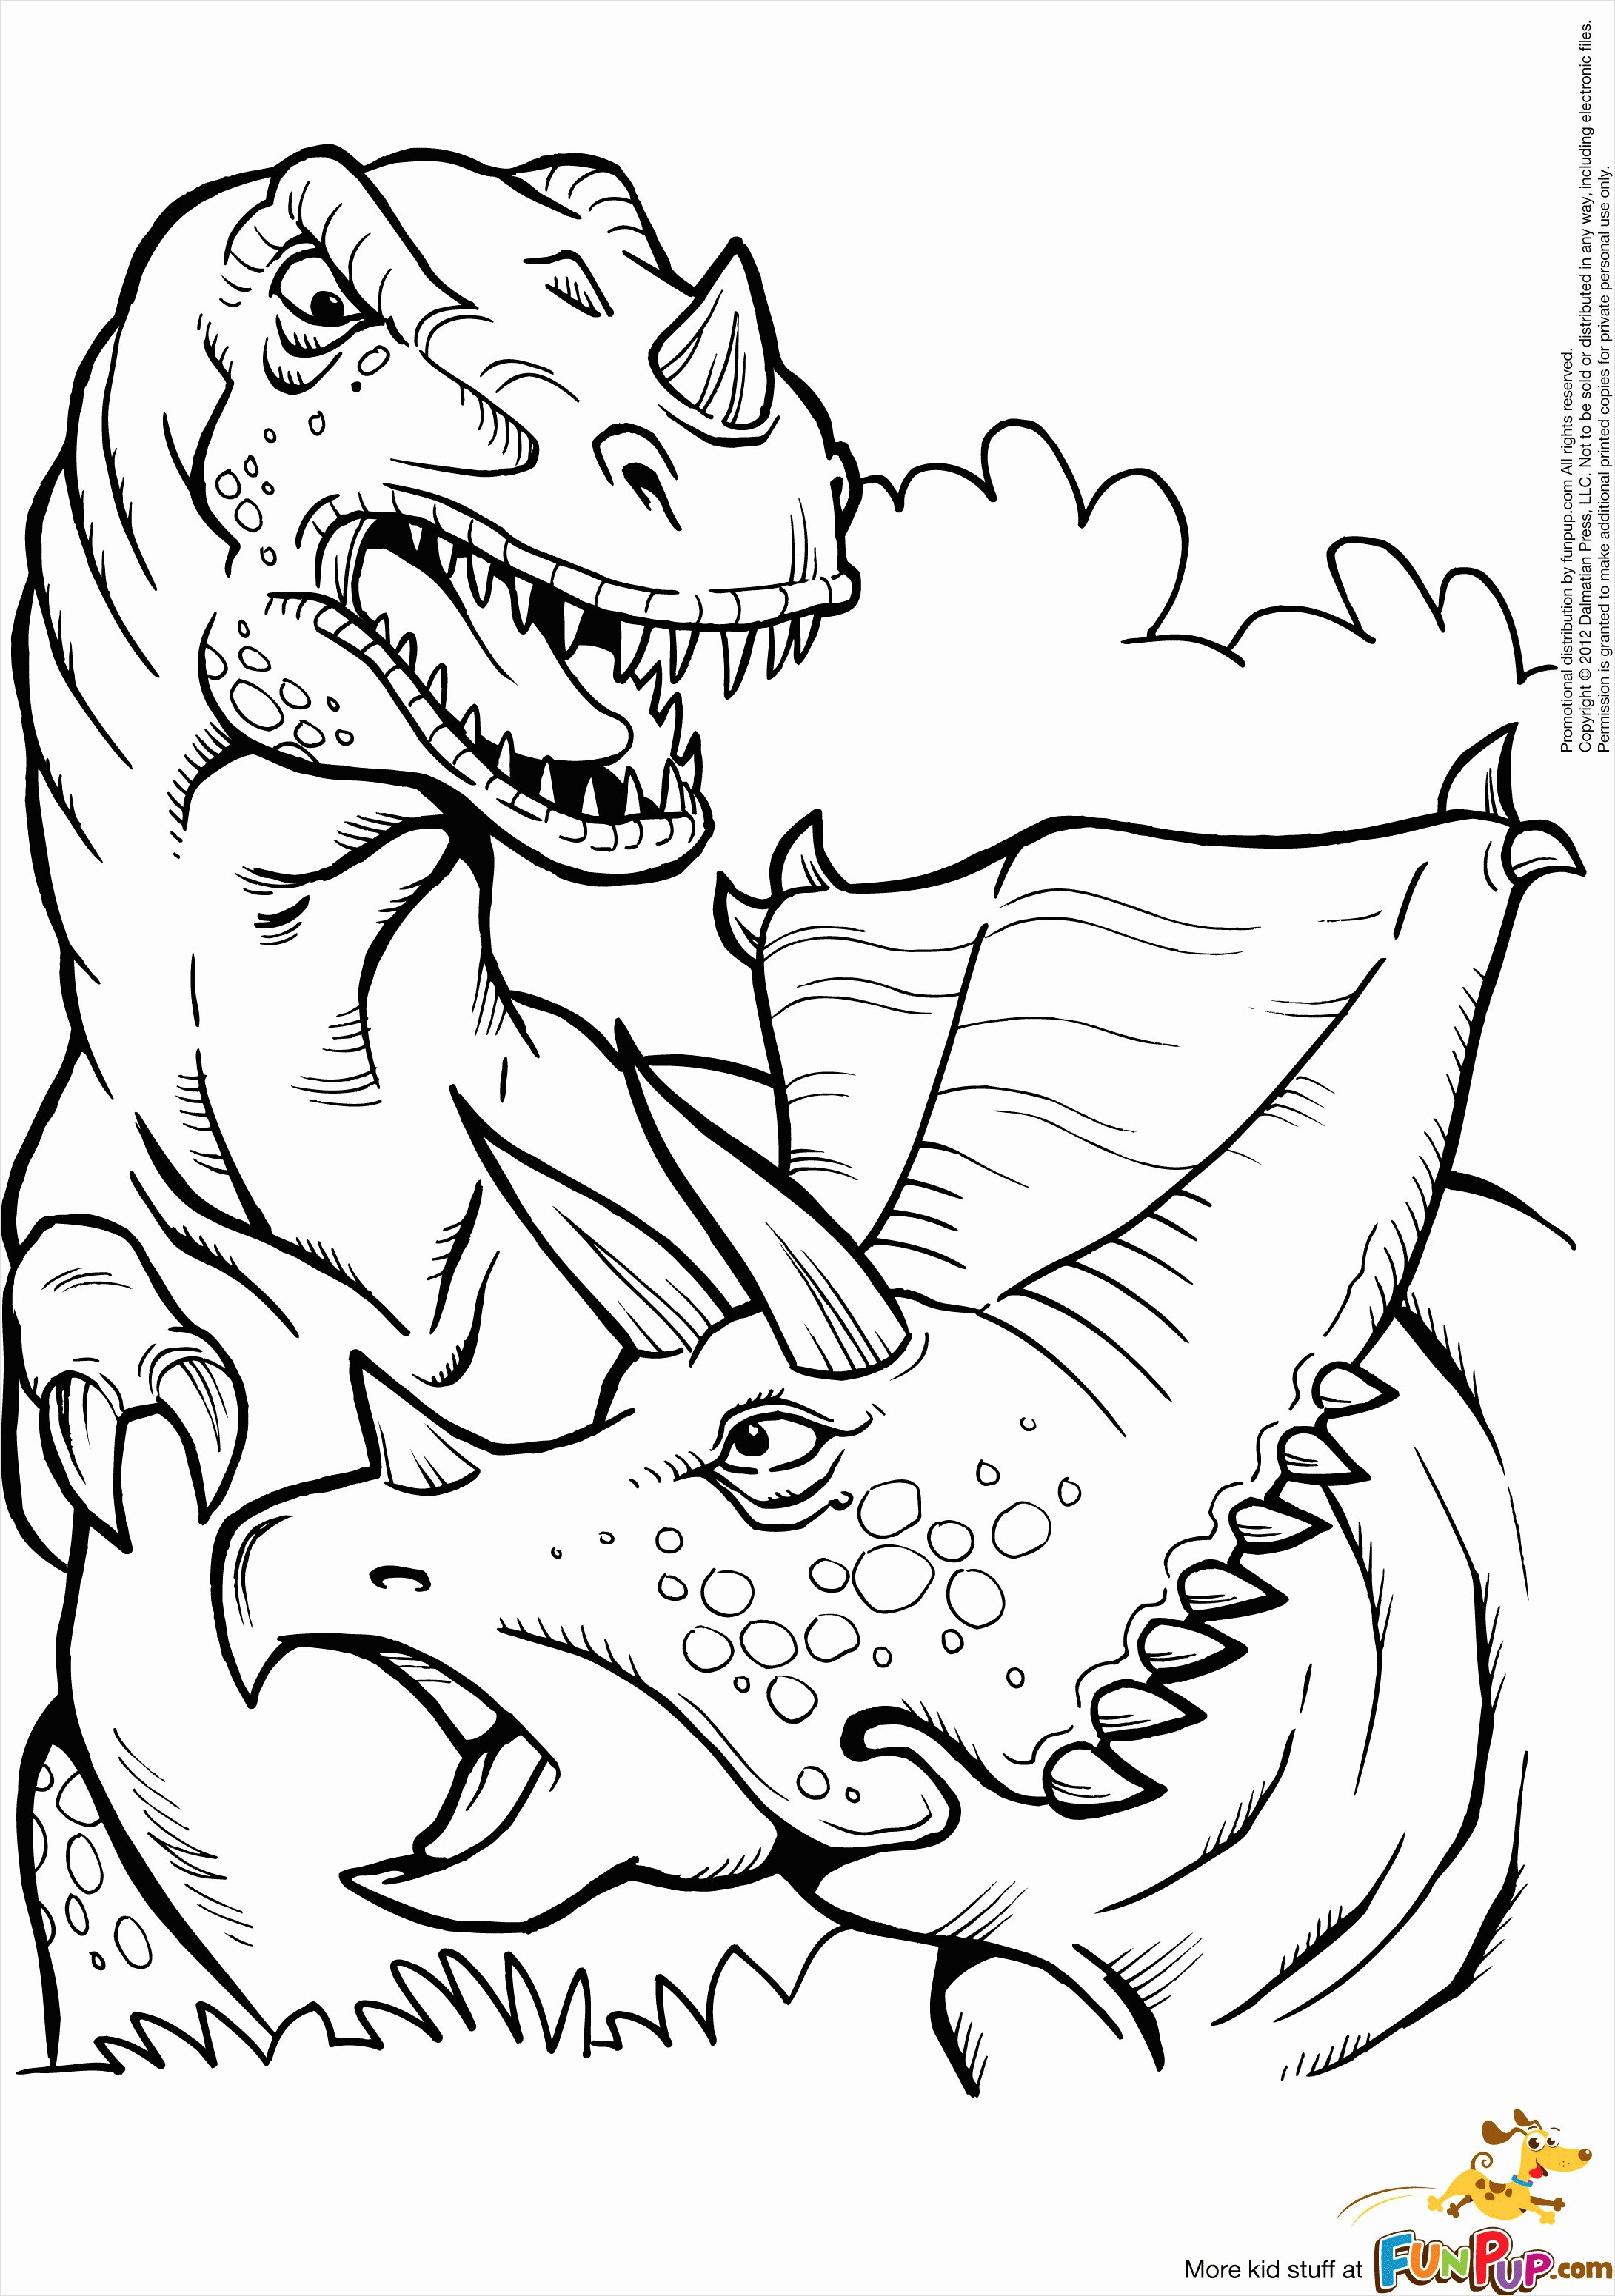 Dinosaur Printable Coloring Pages Beautiful Dinosaur Printable Coloring Pages Lovely Spinosaurus Coloring Pages